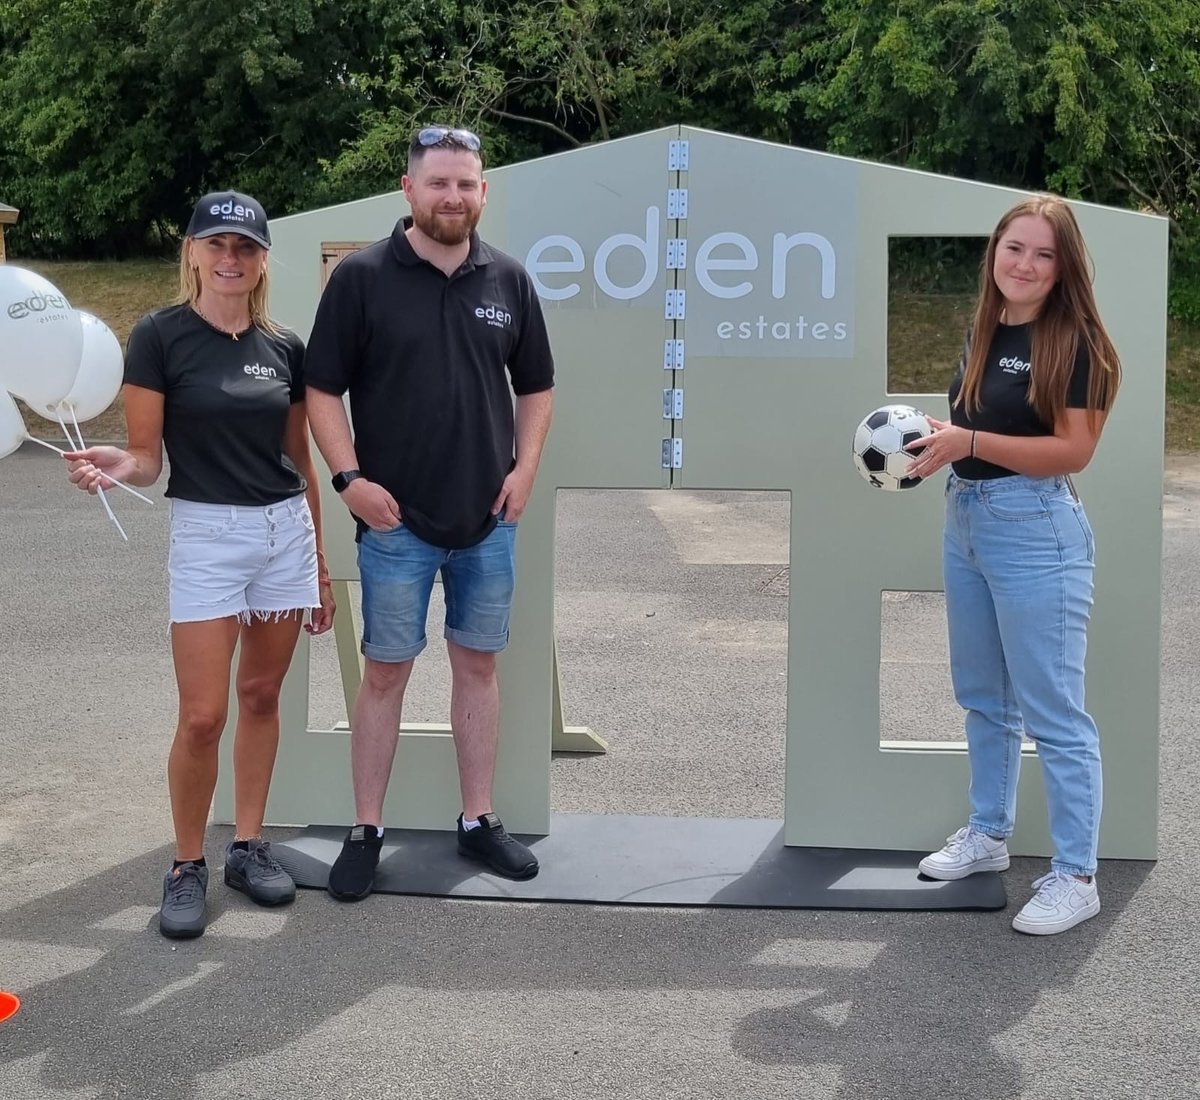 Eden estates have their football shootout house going on the pitch at half time for all the kids to get involved with & for being put in to a prizedraw to win a signed football by the players

FREE eden balloons, footballs & ice creams to children
@EdenEstateAgent